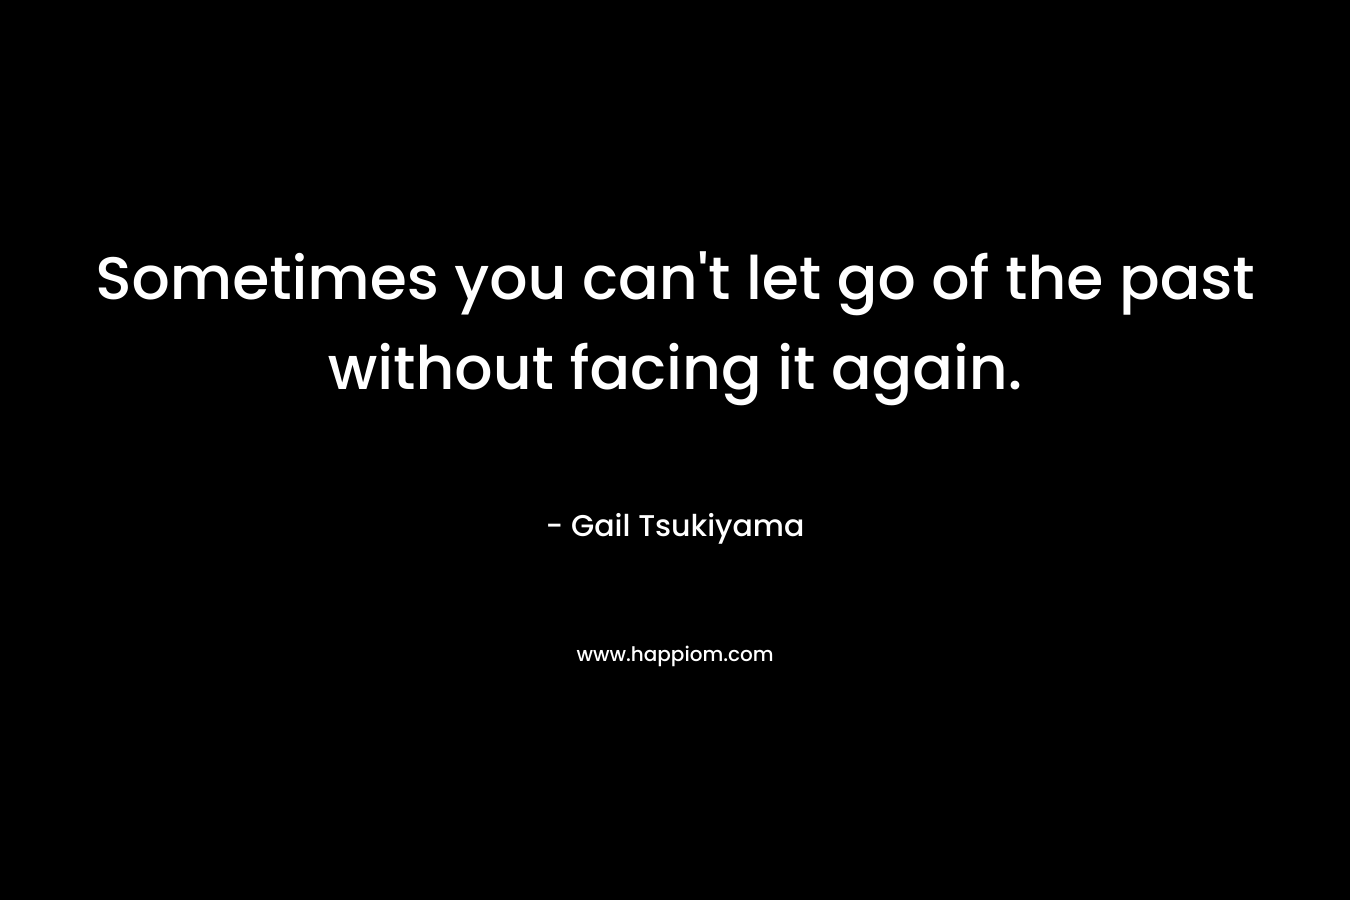 Sometimes you can't let go of the past without facing it again.